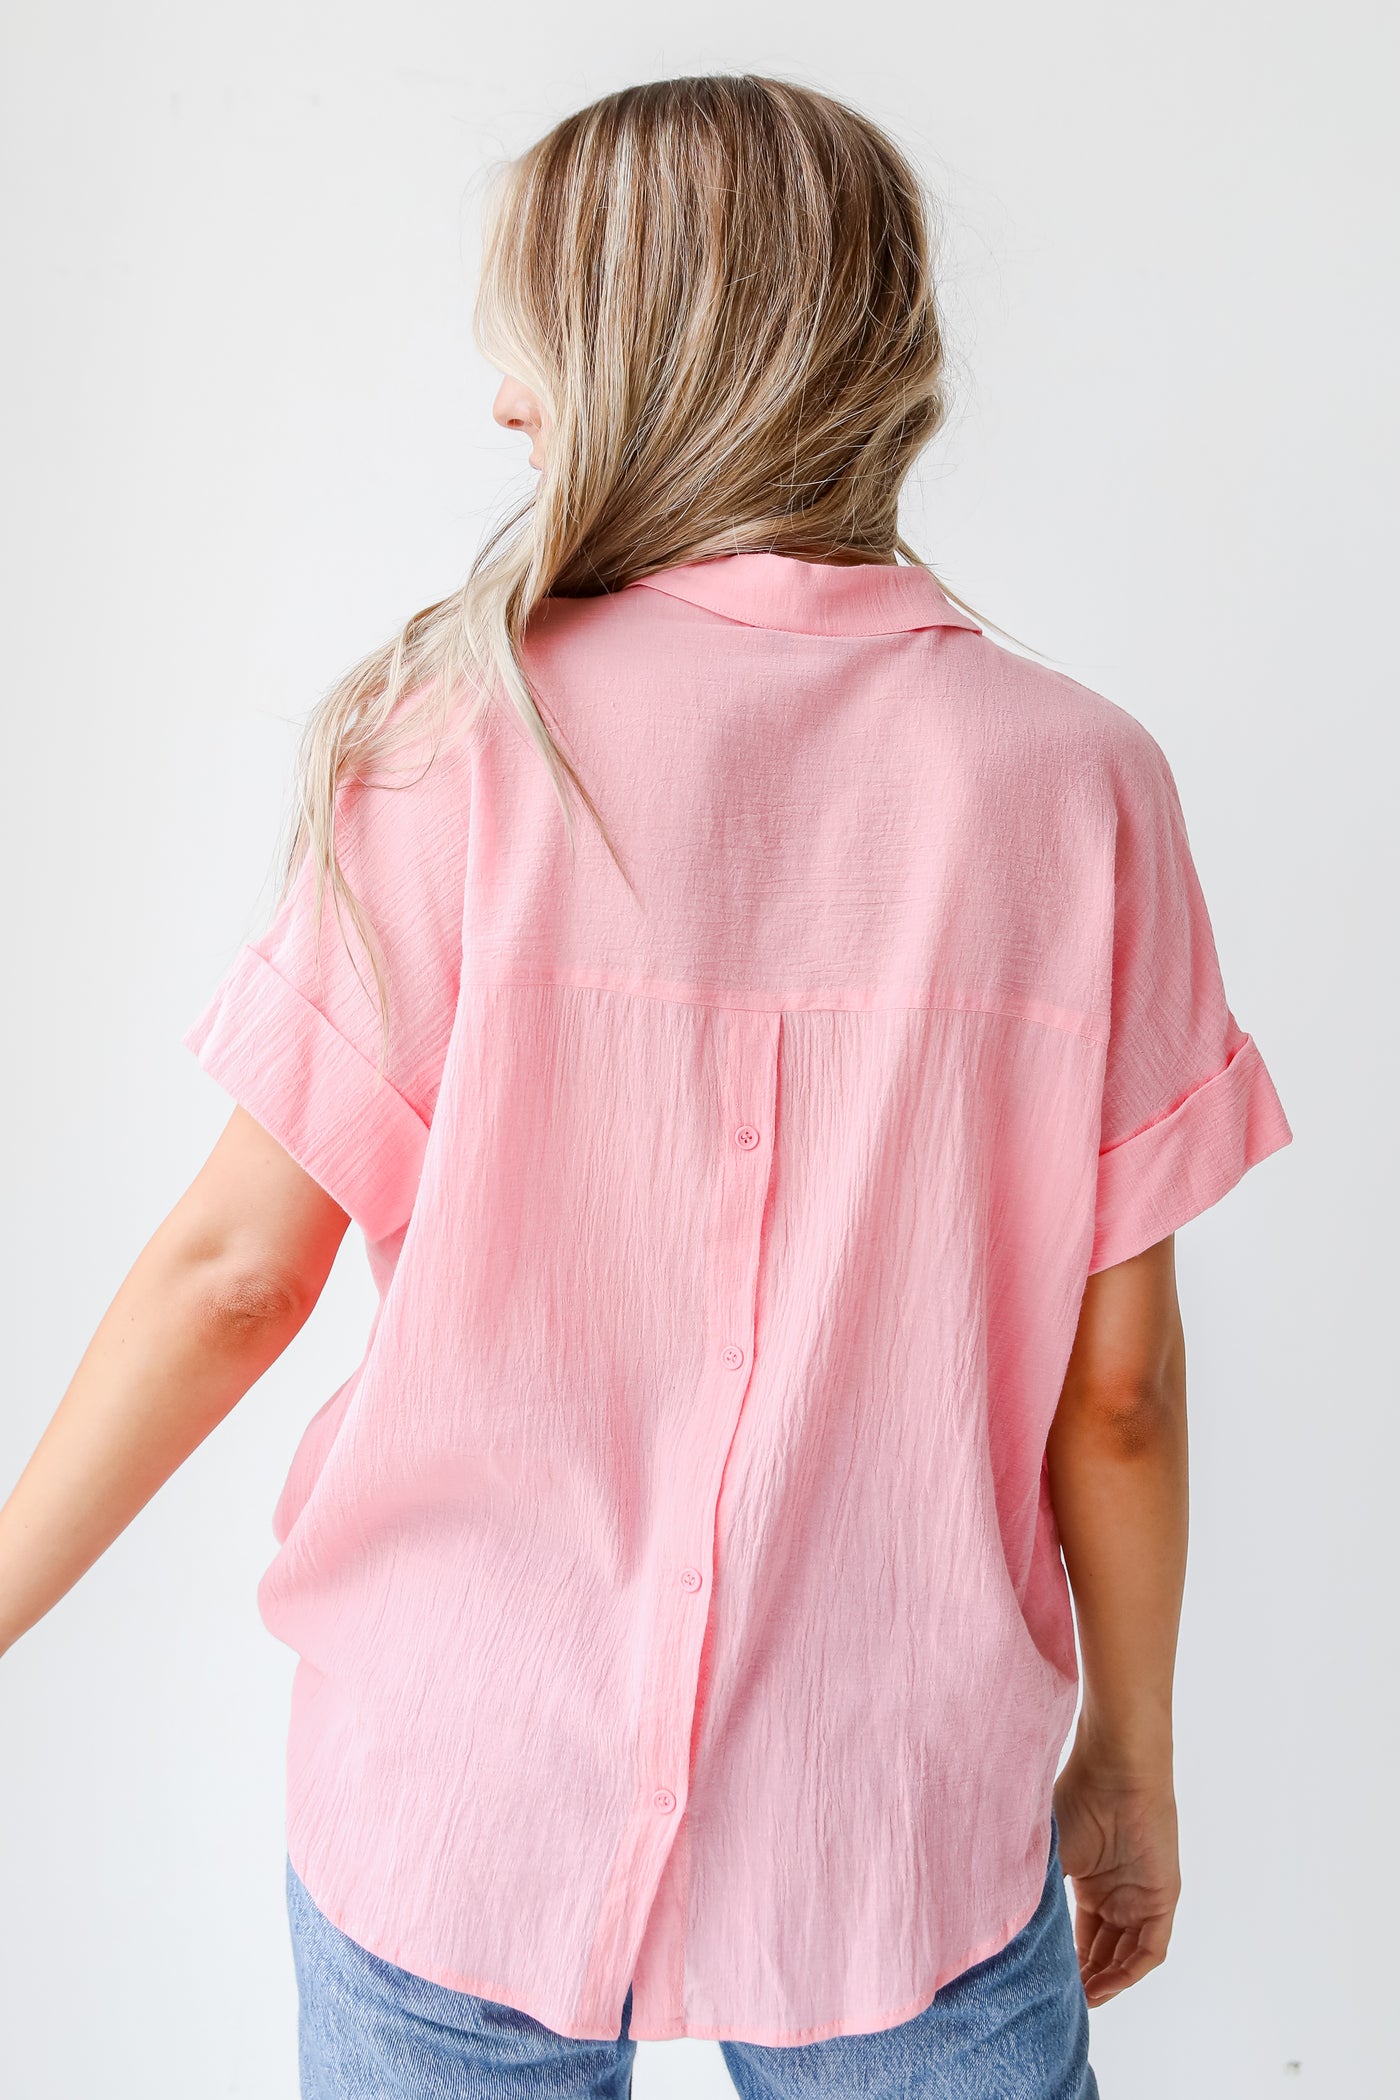 Linen Blouse in pink back view